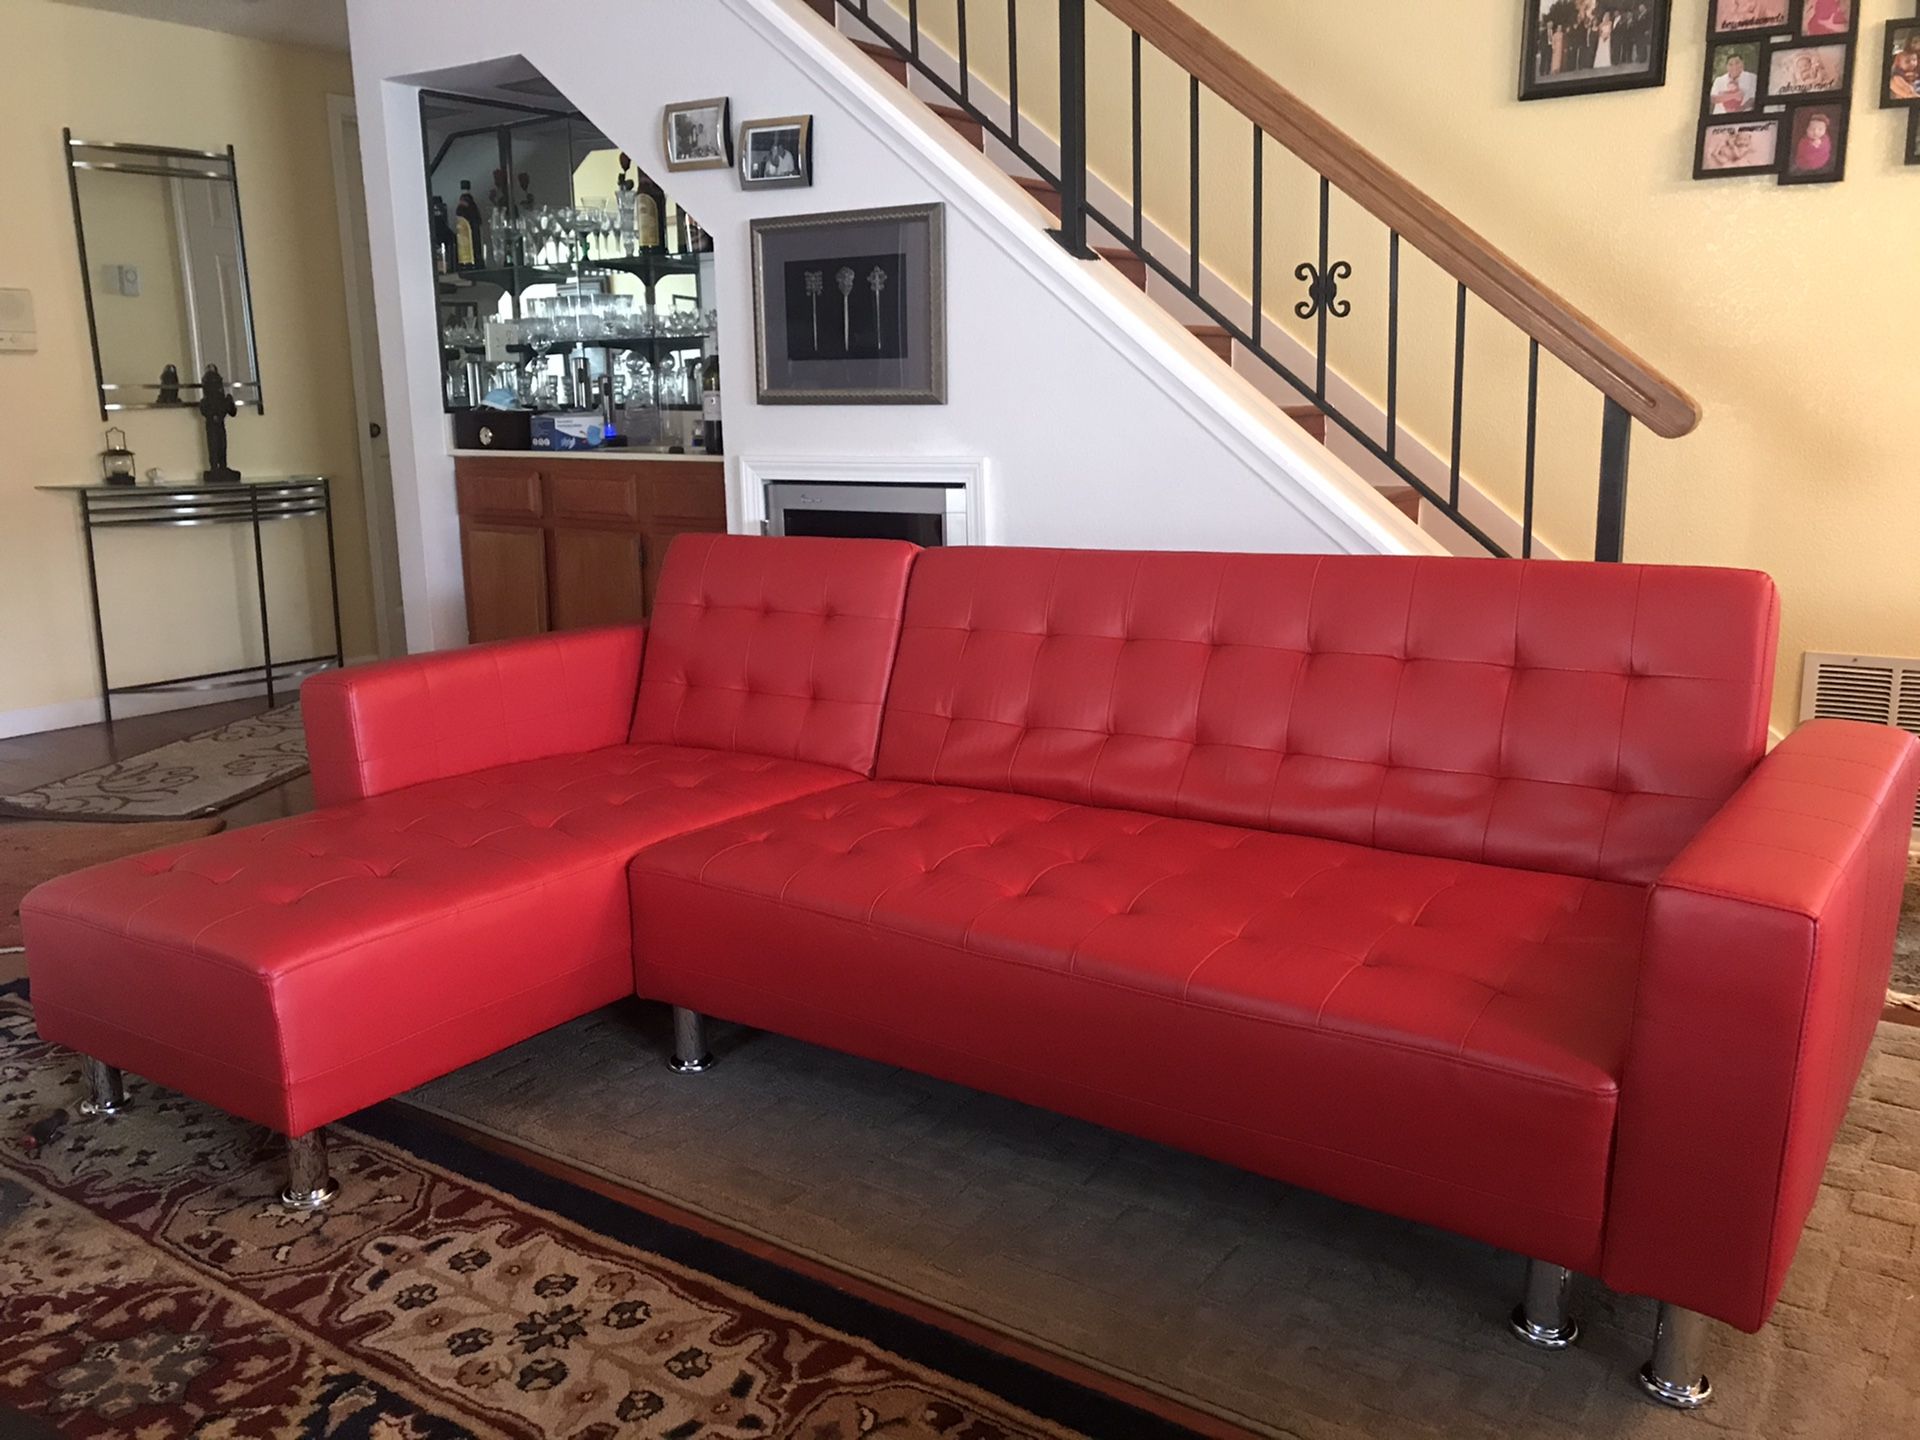 Brand L shape corner sofa. Free curbside delivery included